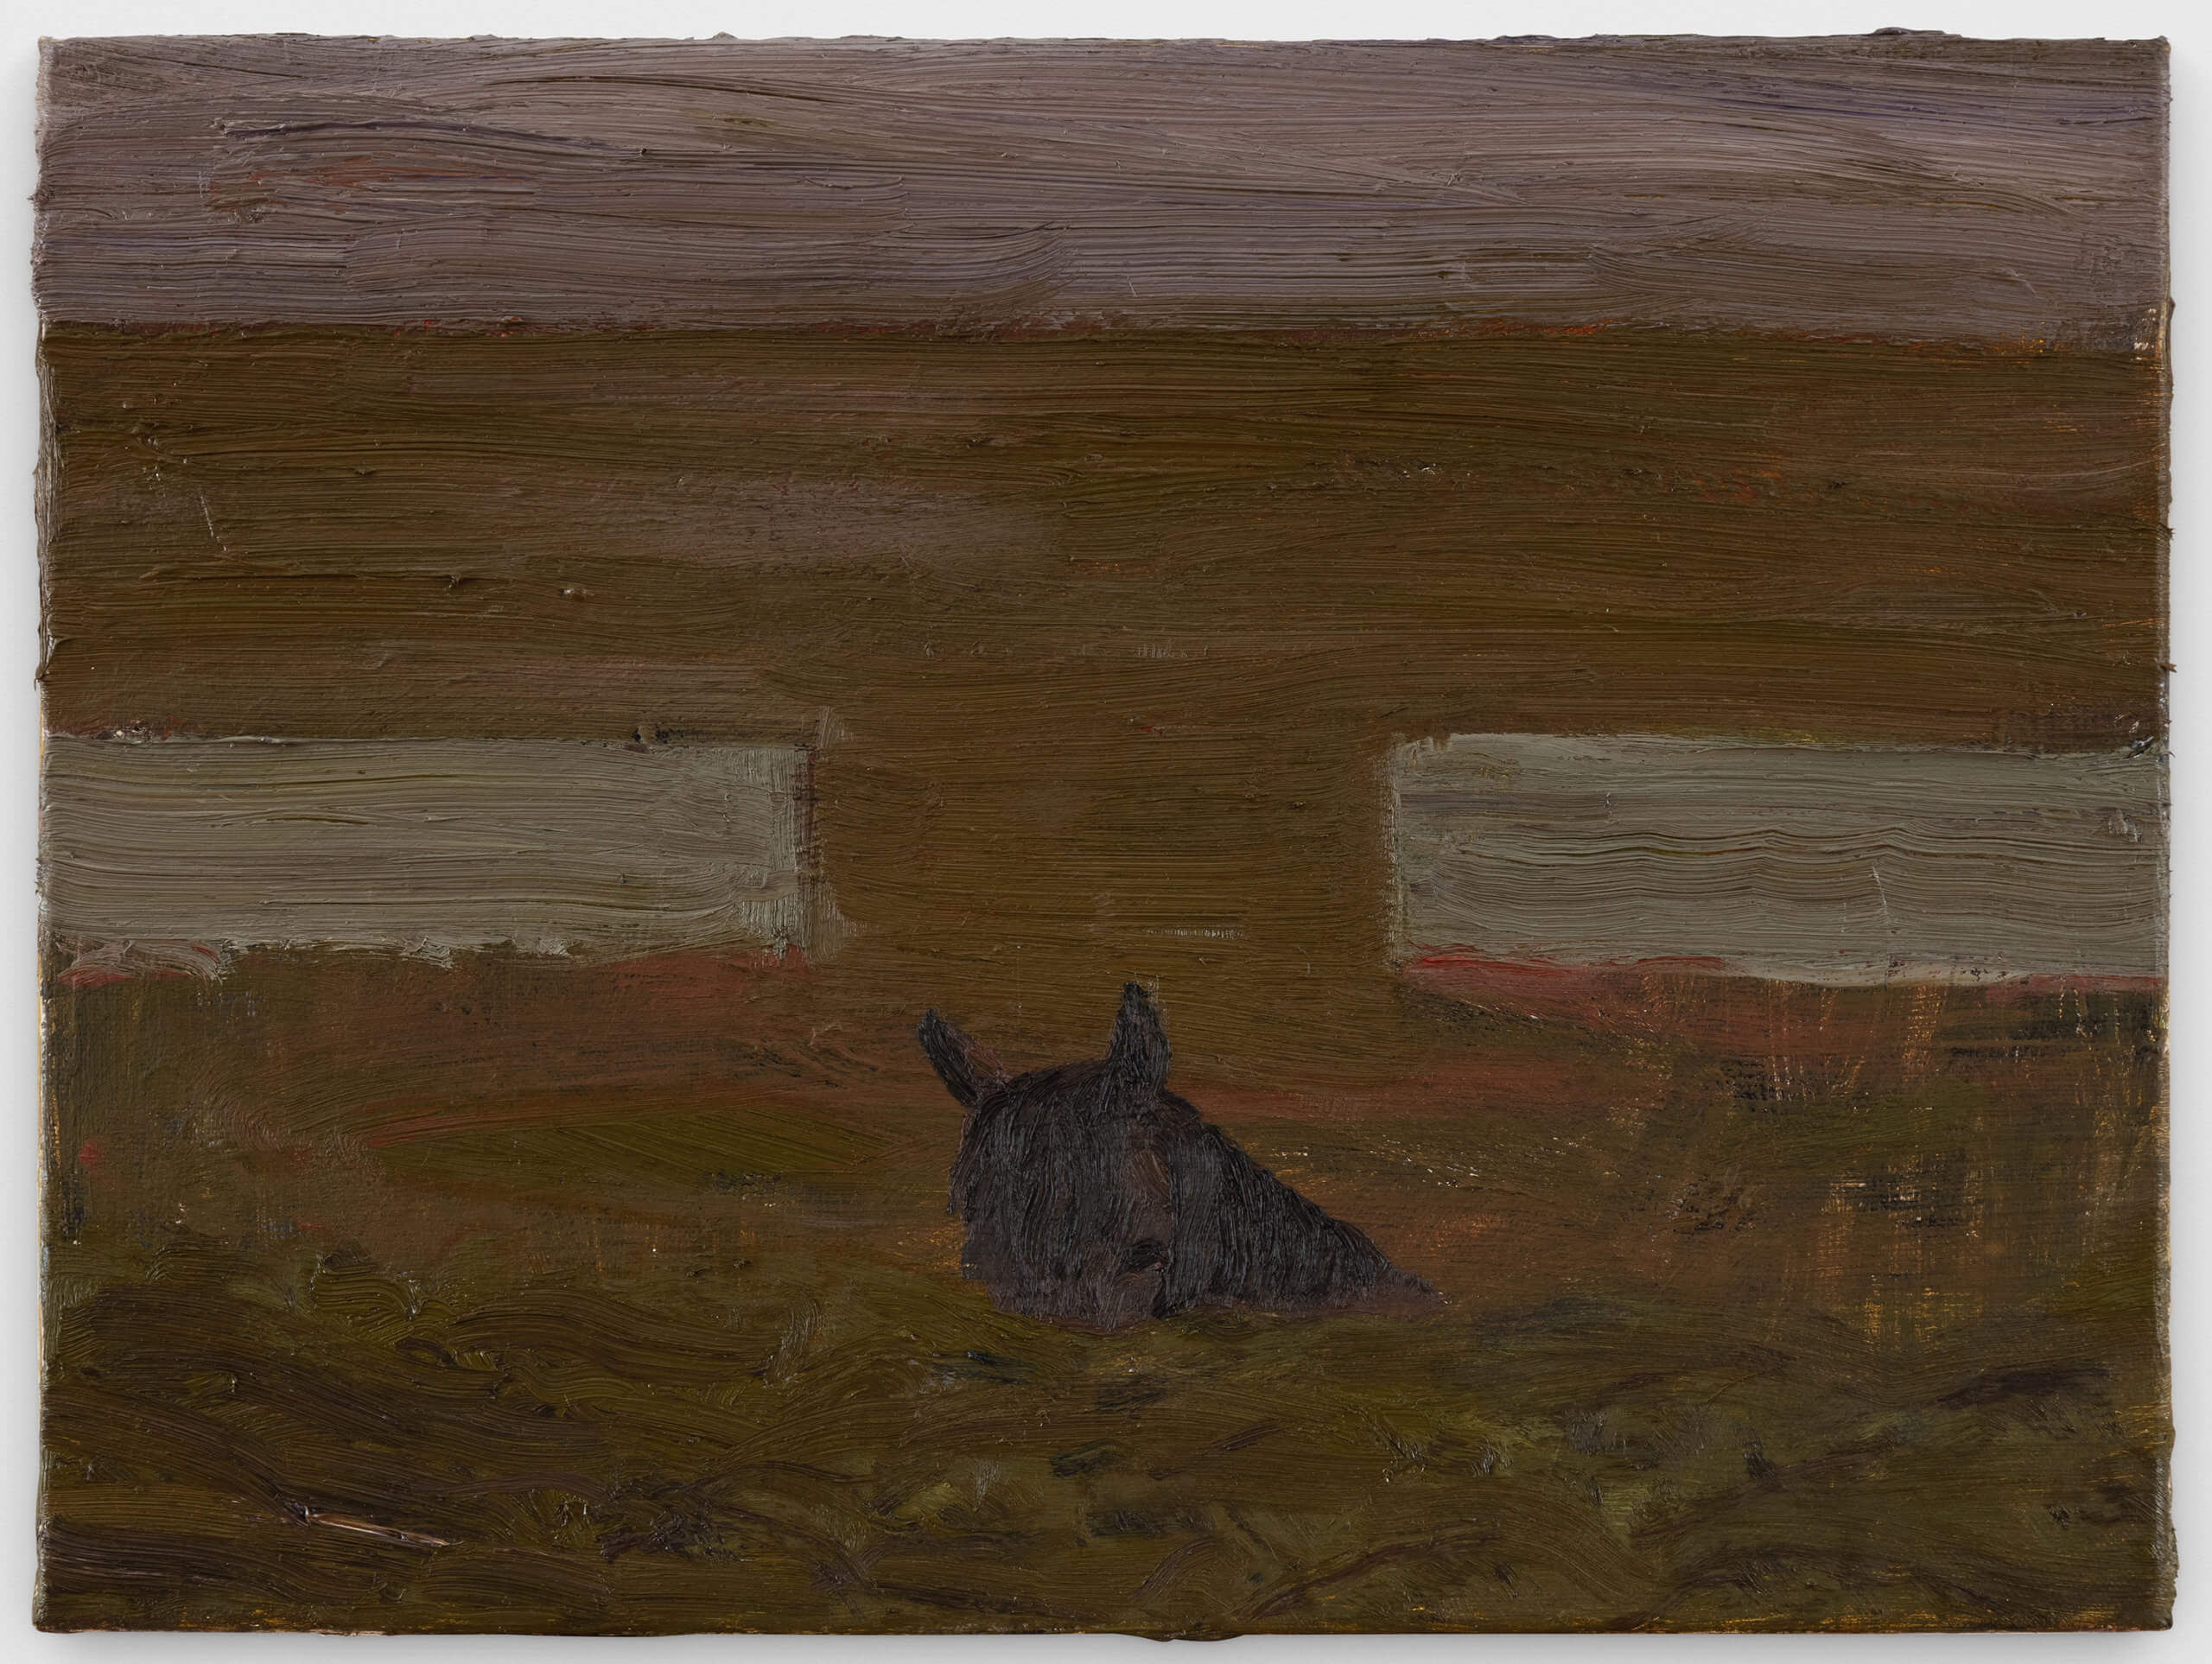 Danny Fox Towednack burial, 2020 oil on canvas 12 x 16 in. (30.5 x 40.6 cm.)